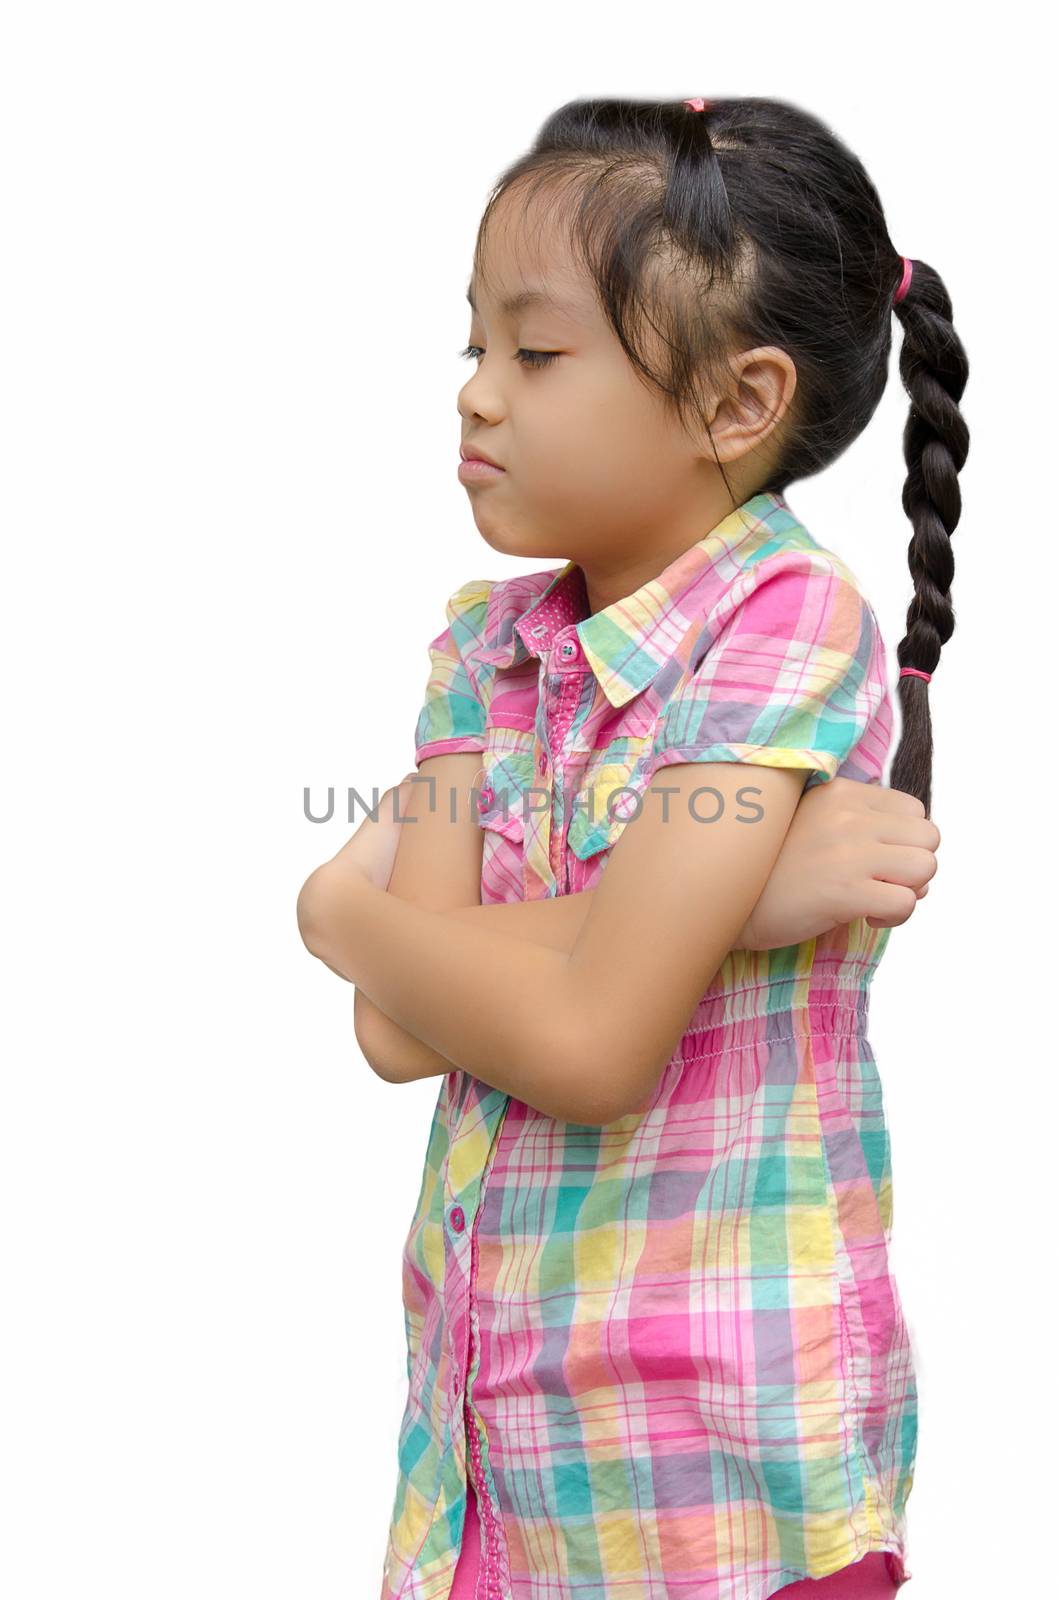 Angry little girl on the white background.